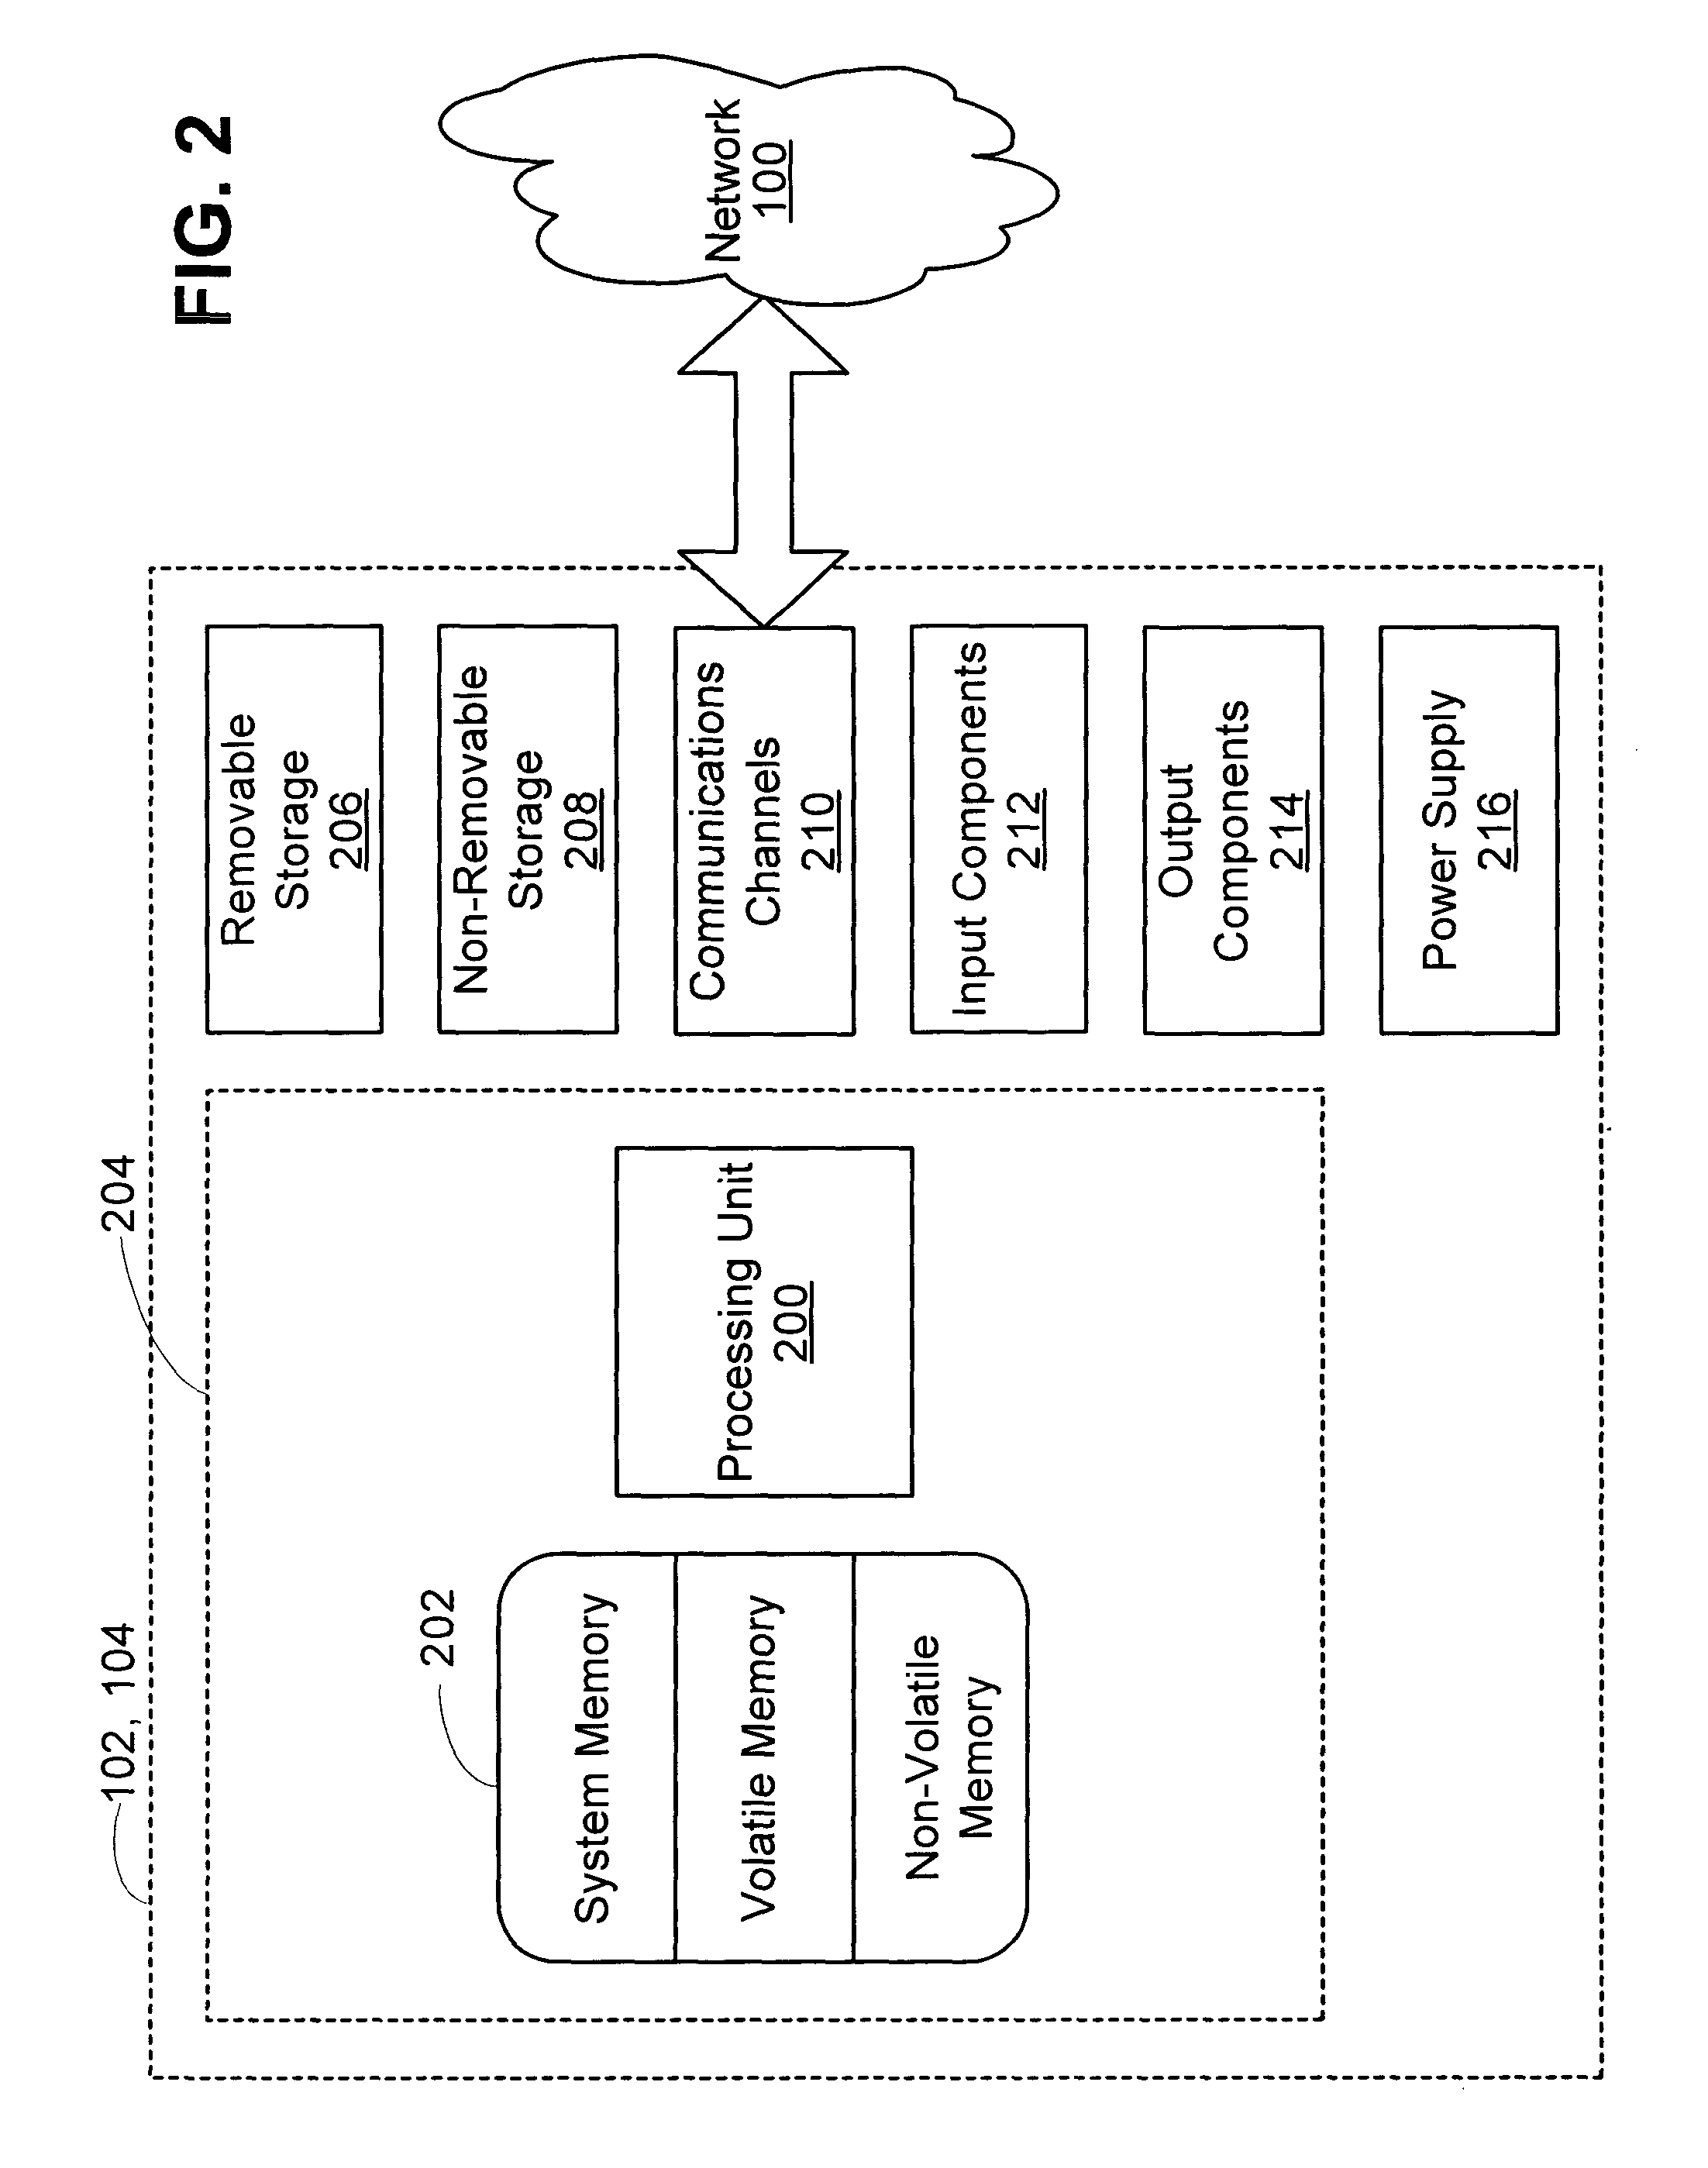 Method and system for delayed allocation of resources